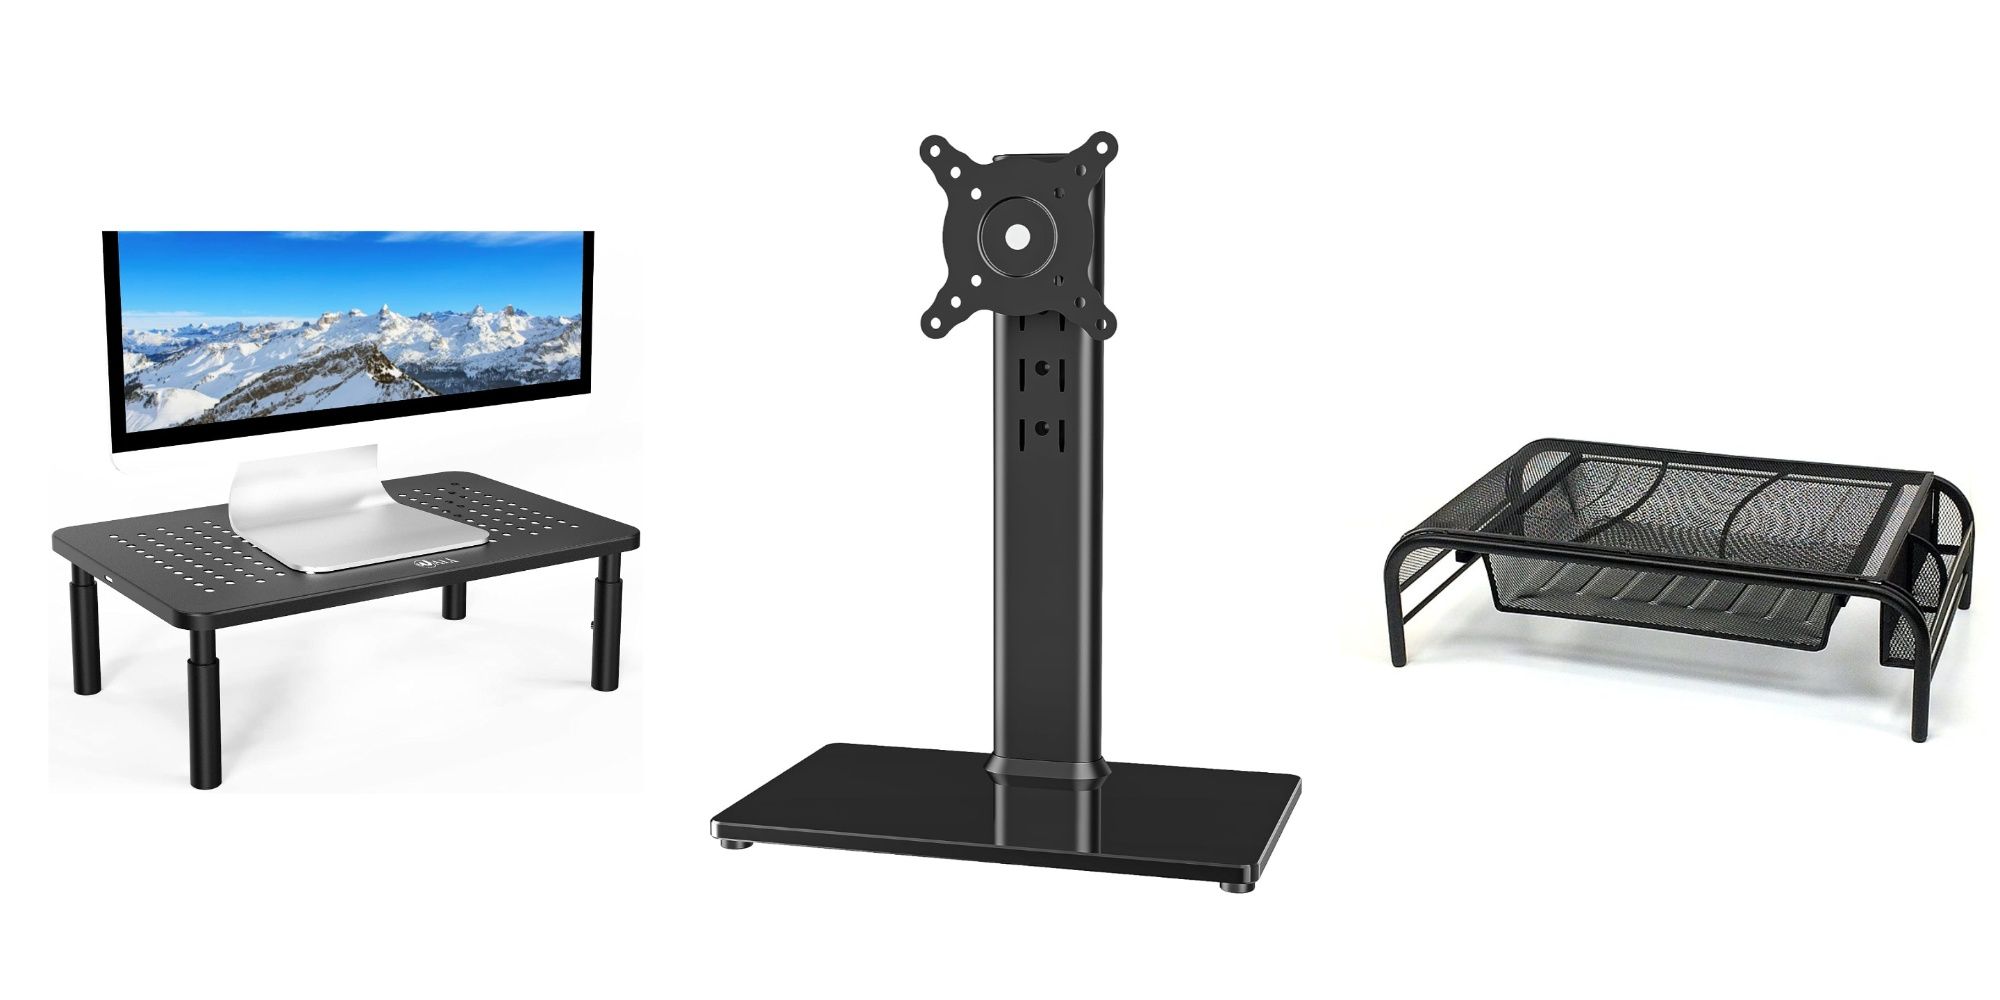 A trio of monitor stands, with two risers on the sides and a monitor arm in the center.